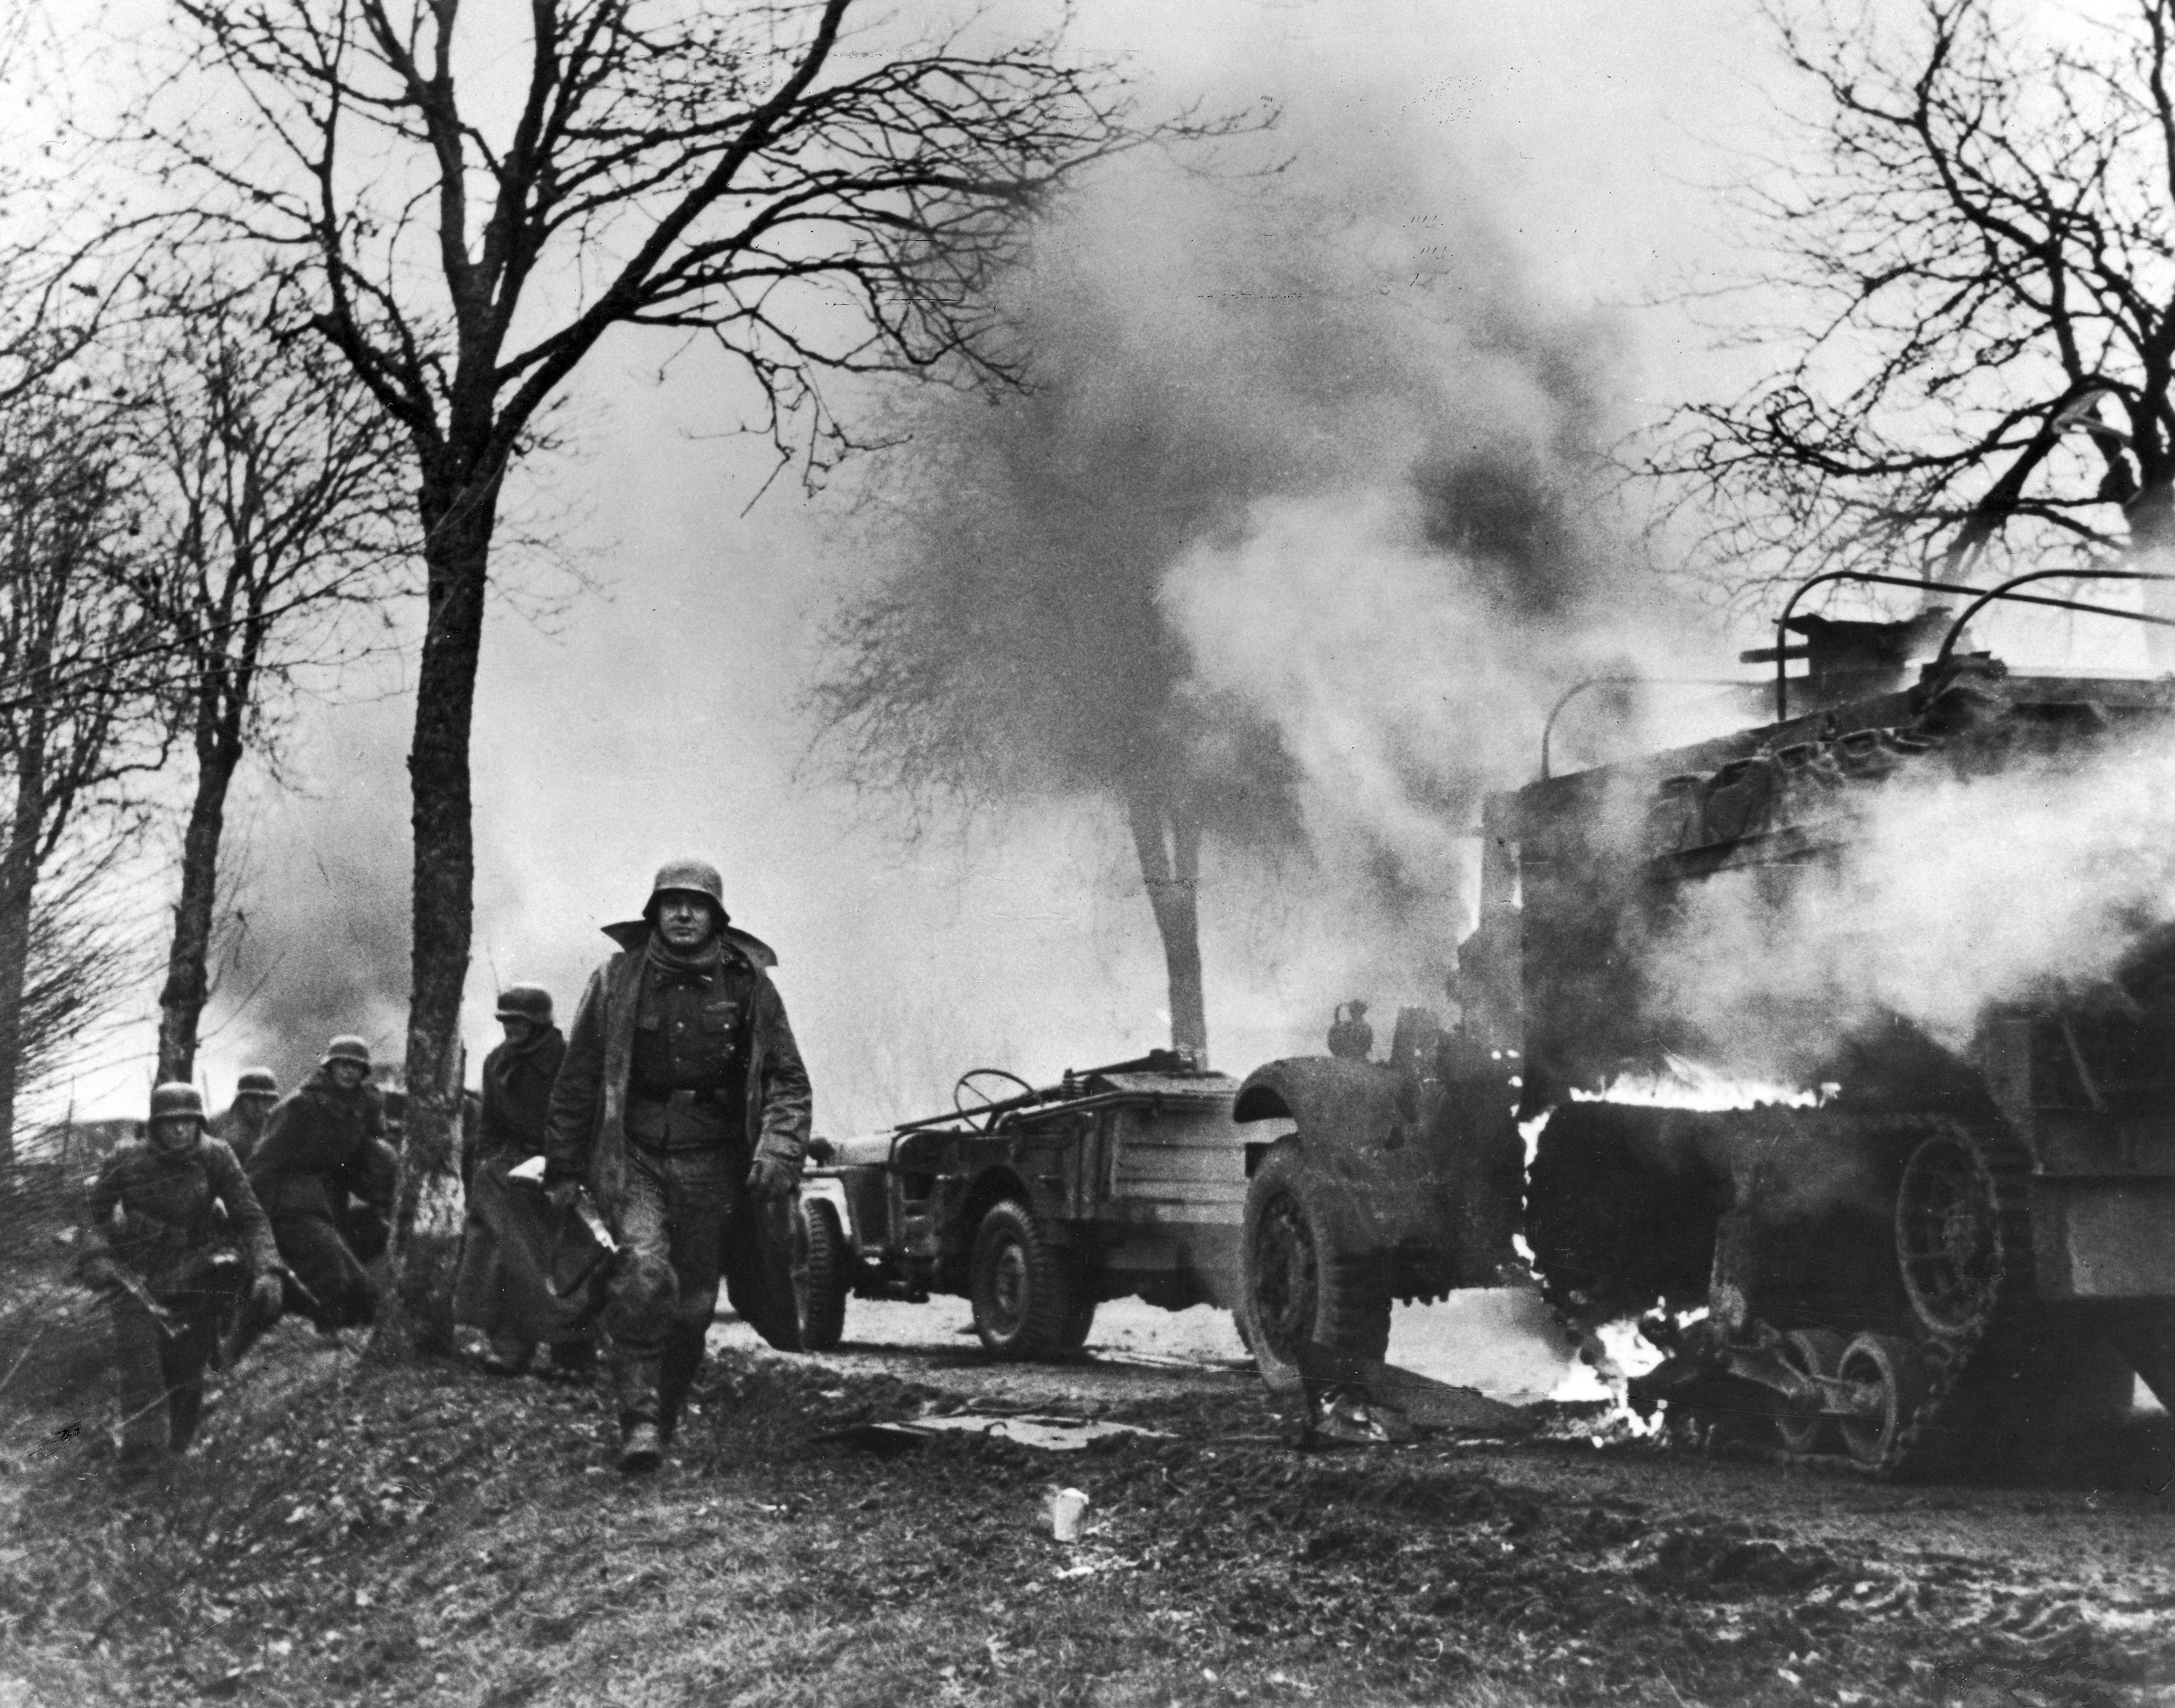 German soldiers passing burning American vehicles during the Battle of the Bulge. (National Archives)